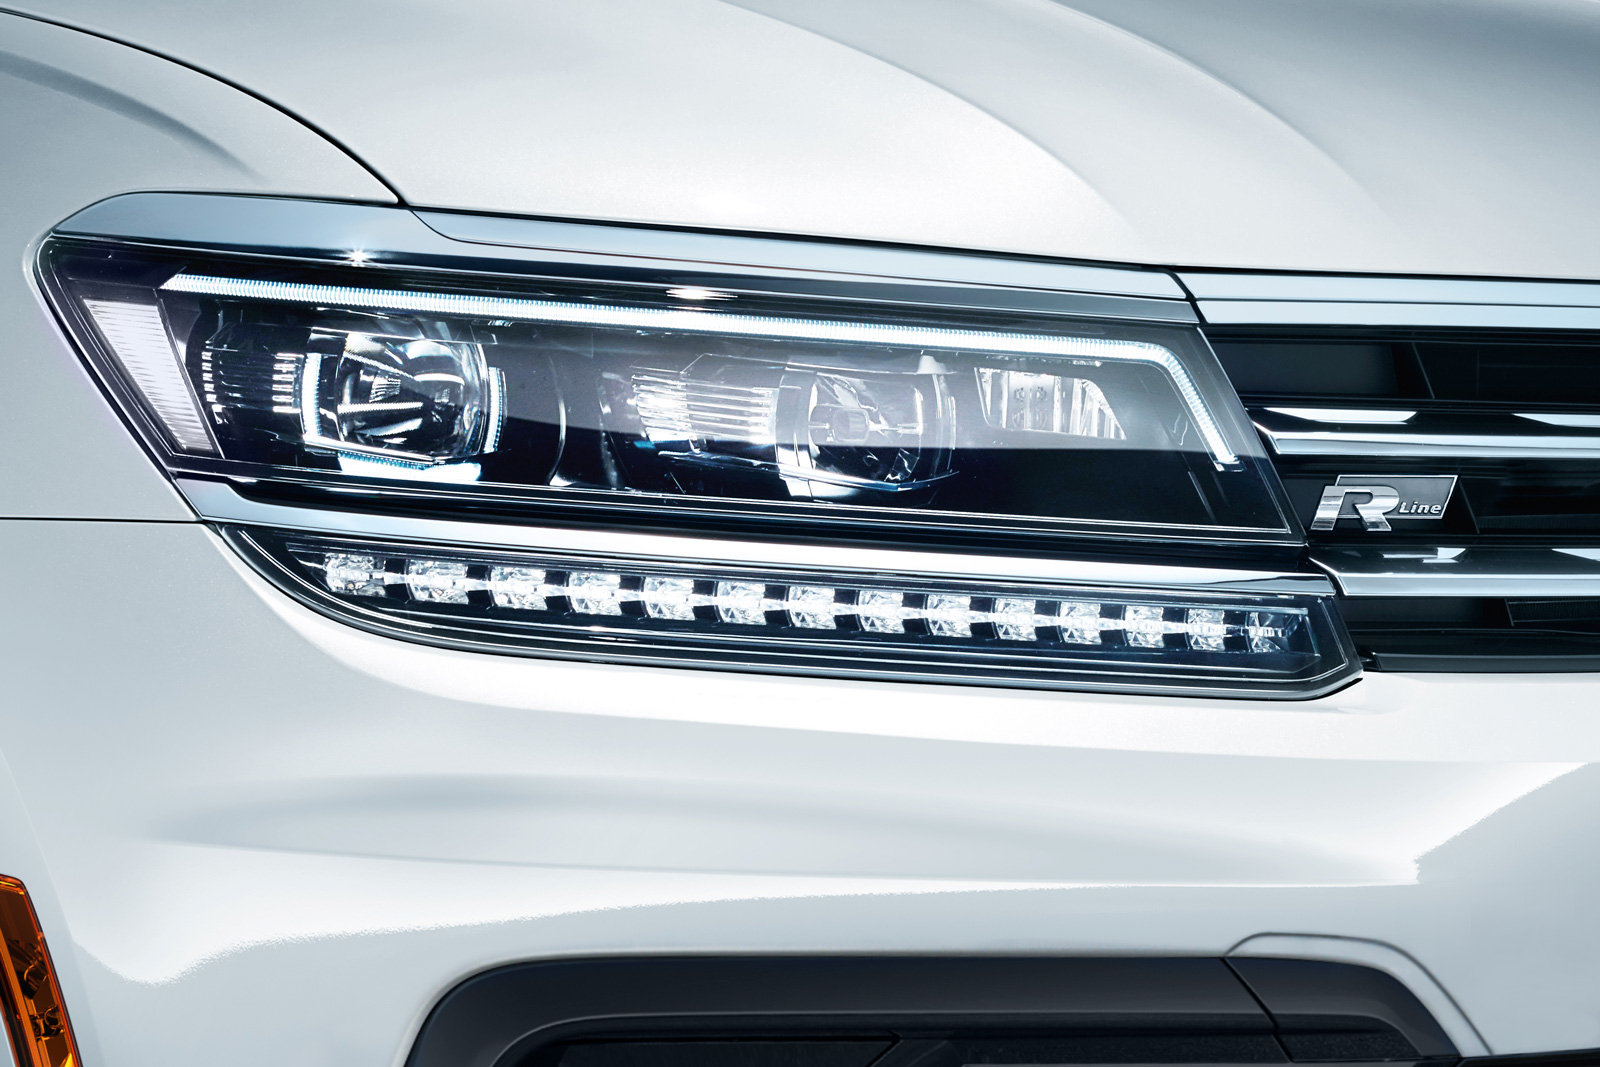 revidere Ruin lammelse What does the 2020 Volkswagen Tiguan look like? 2020 Tiguan Gallery